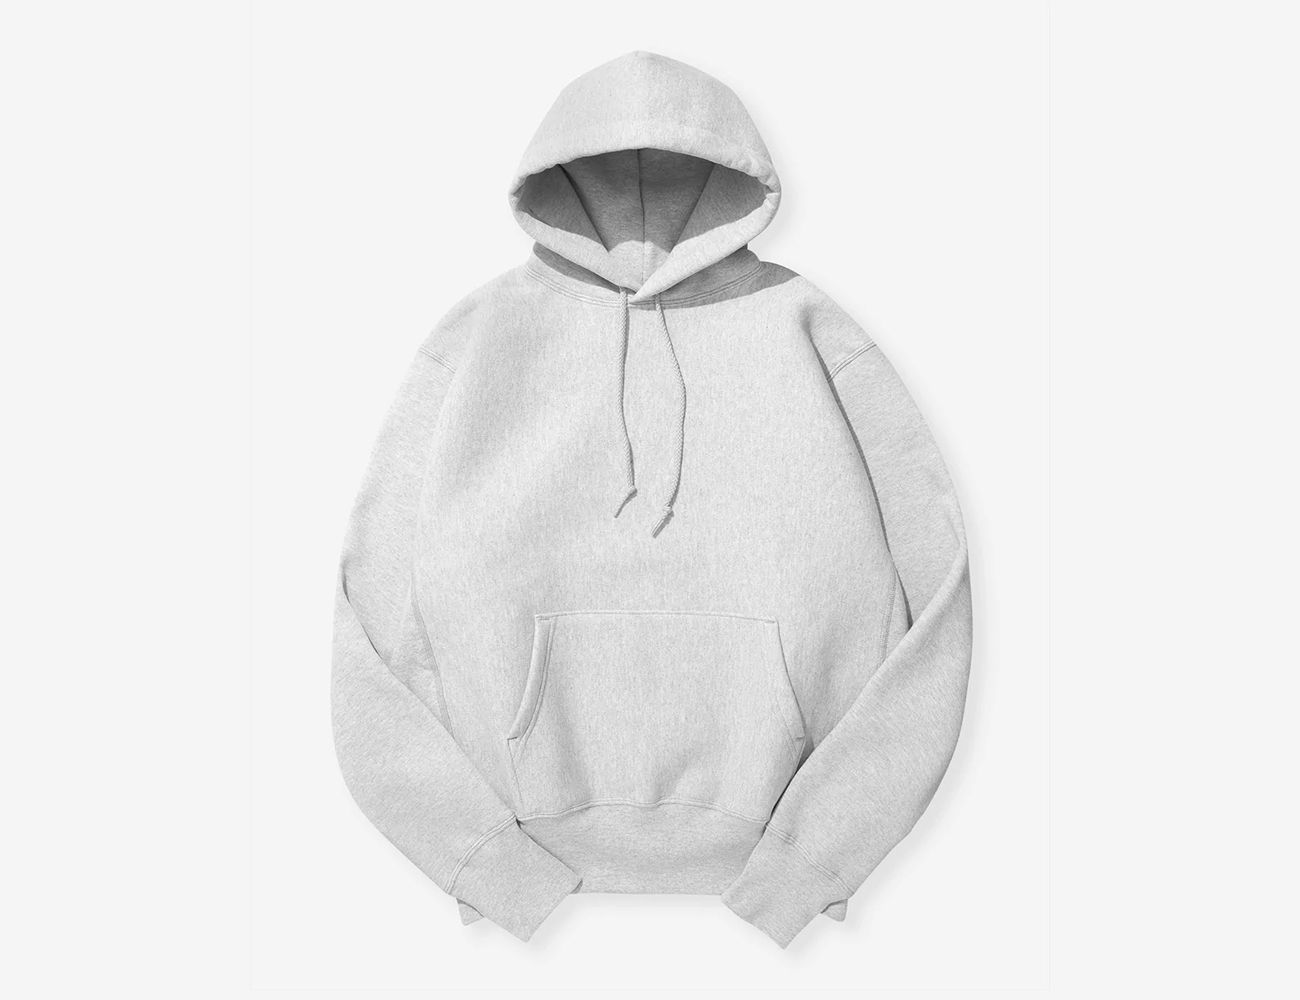 Now's Your Chance to Buy This Cult-Favorite Hoodie